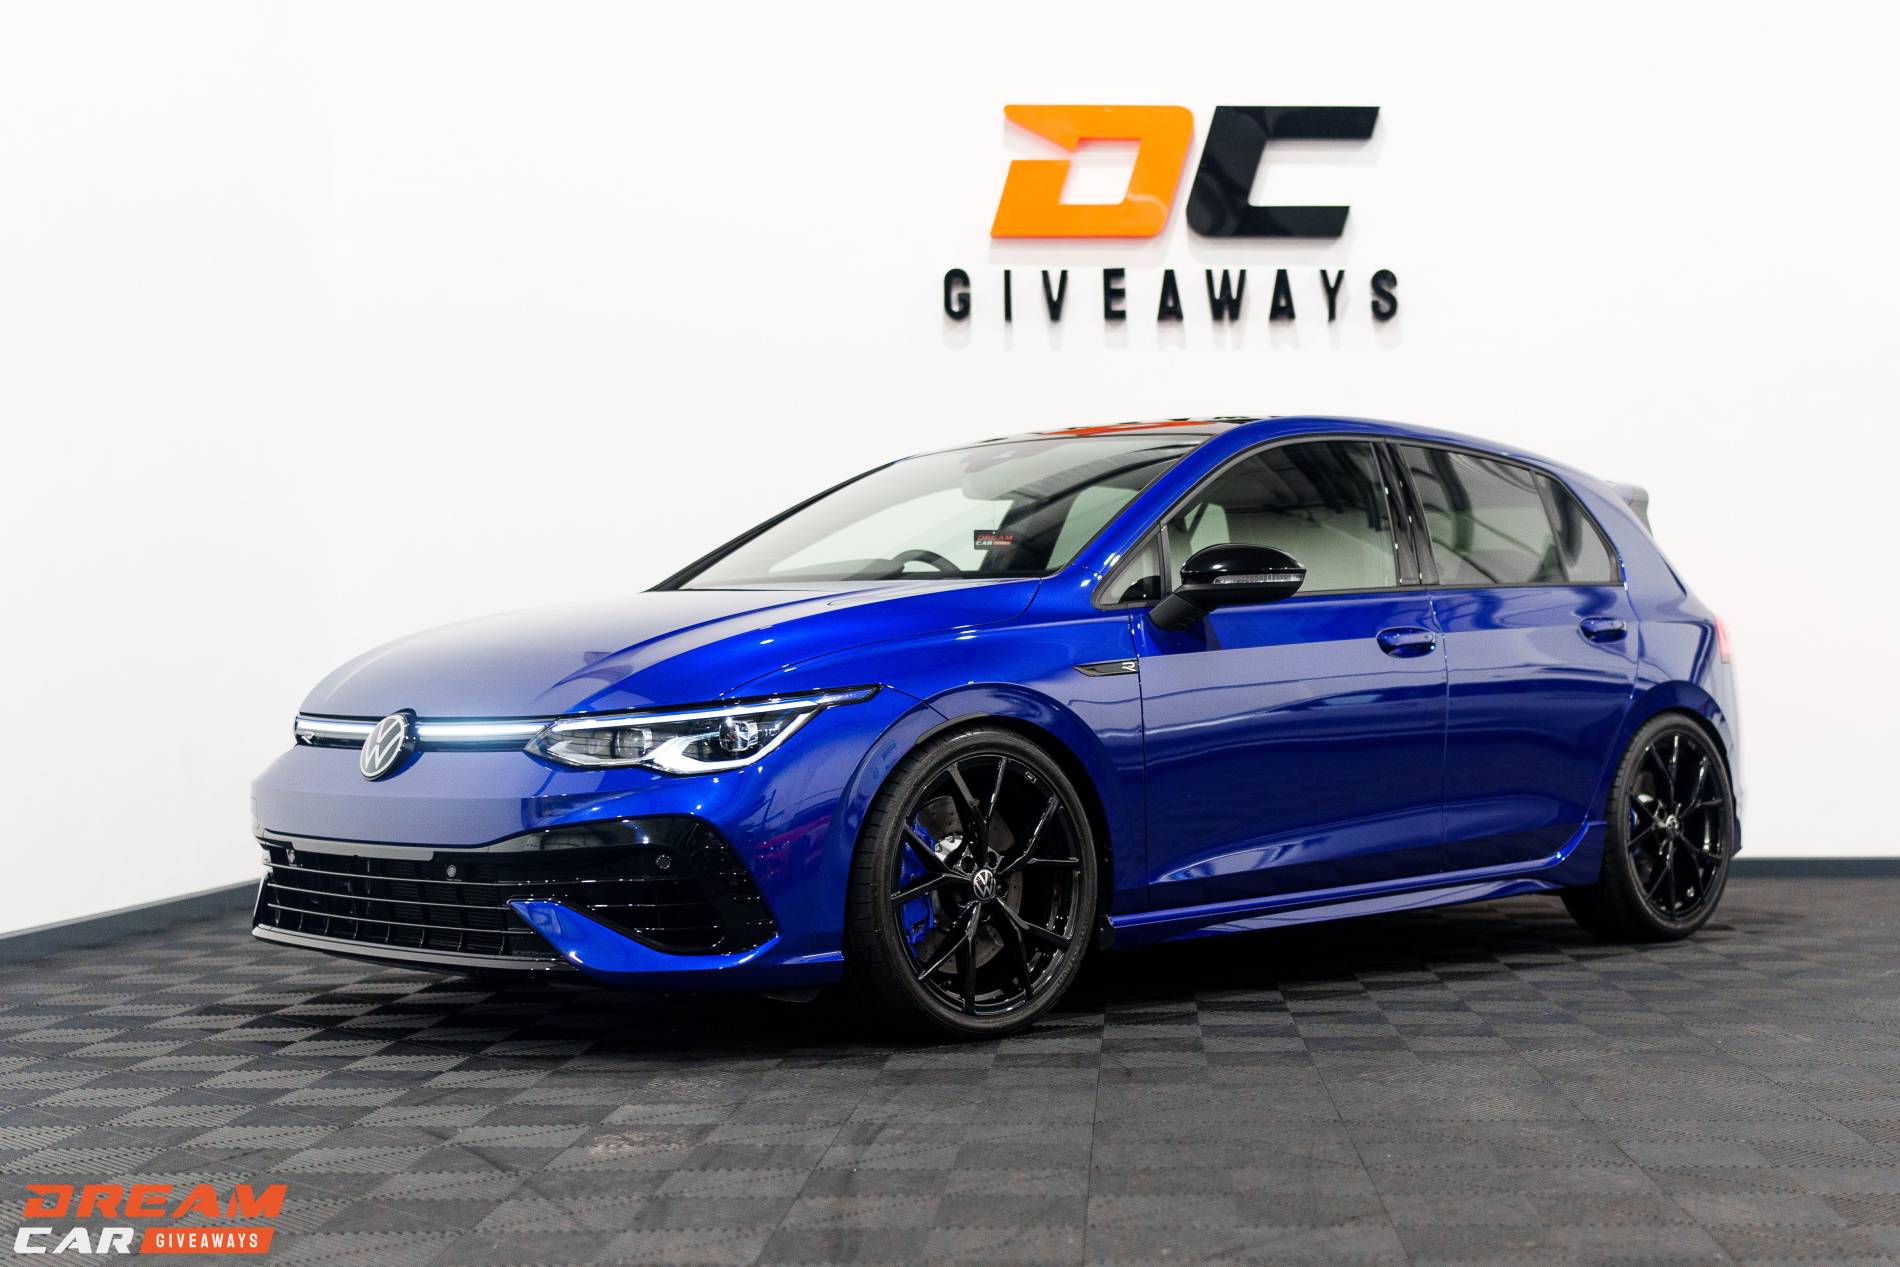 Win this 2023 Volkswagen Golf R & £1000 or £35,000 Tax Free